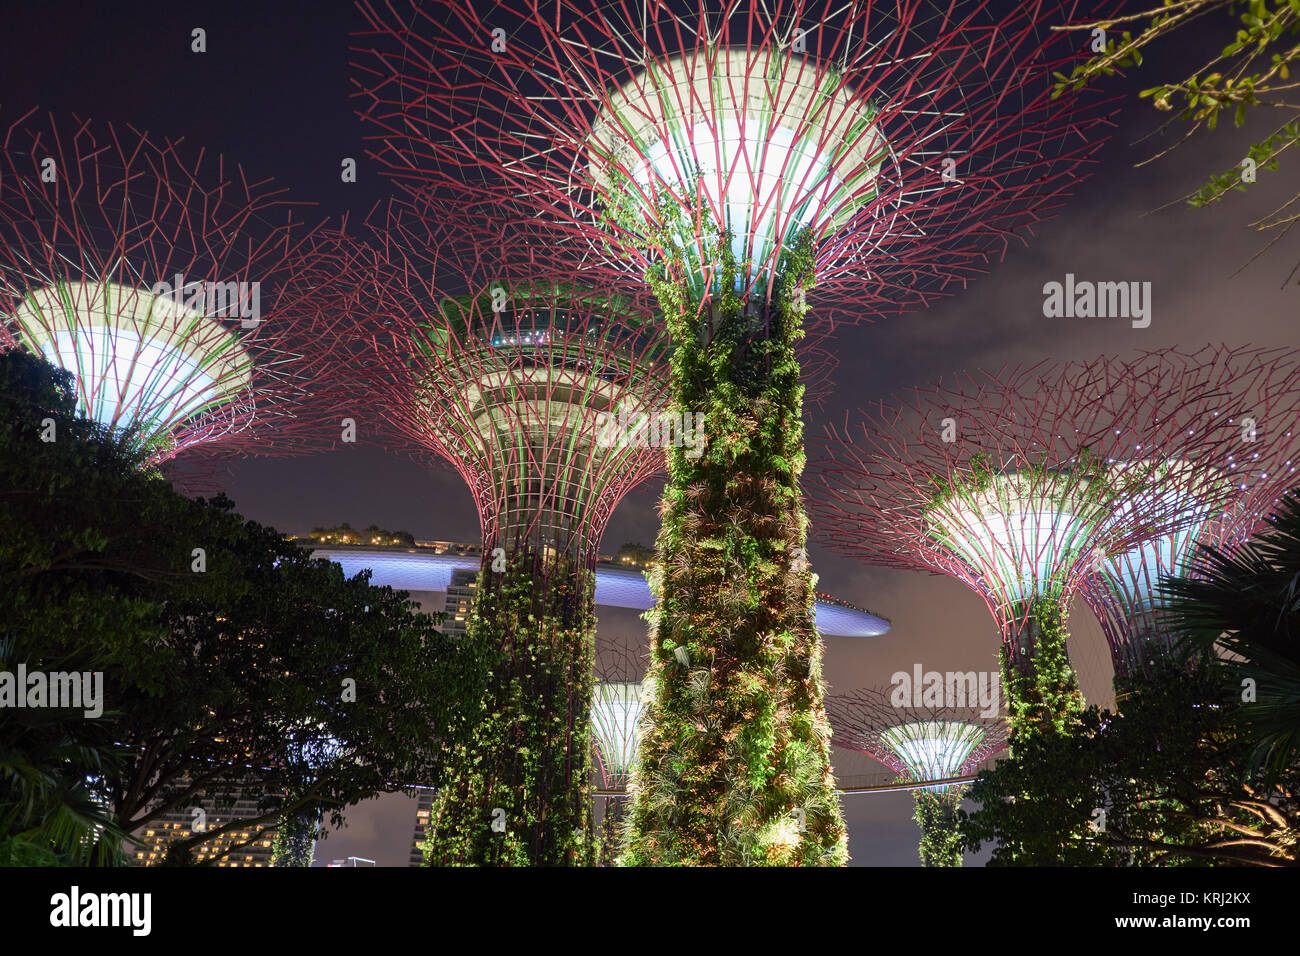 Marina Bay Sands Hotel and SkyPark behind the Supertree Grove - incredible modern architecture in Singapore Stock Photo